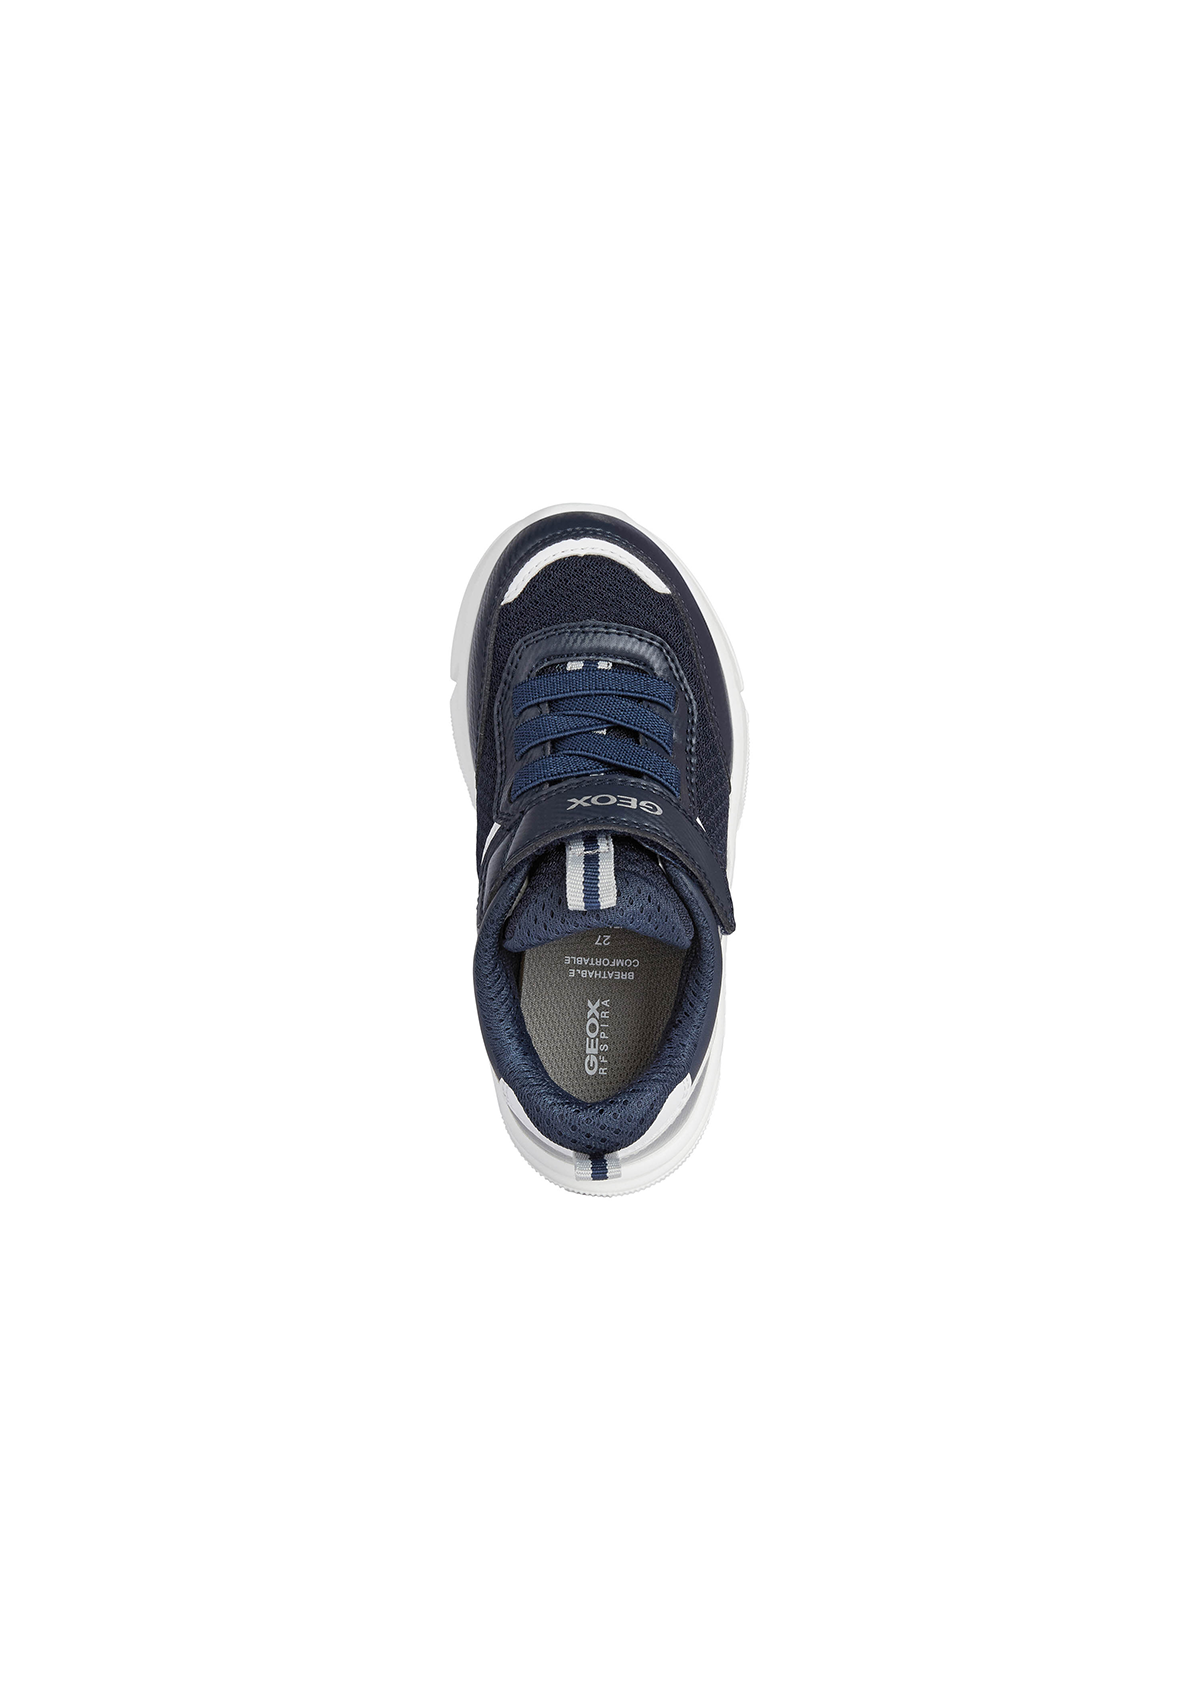 Geox Boys Trainers ARIL Navy Silver